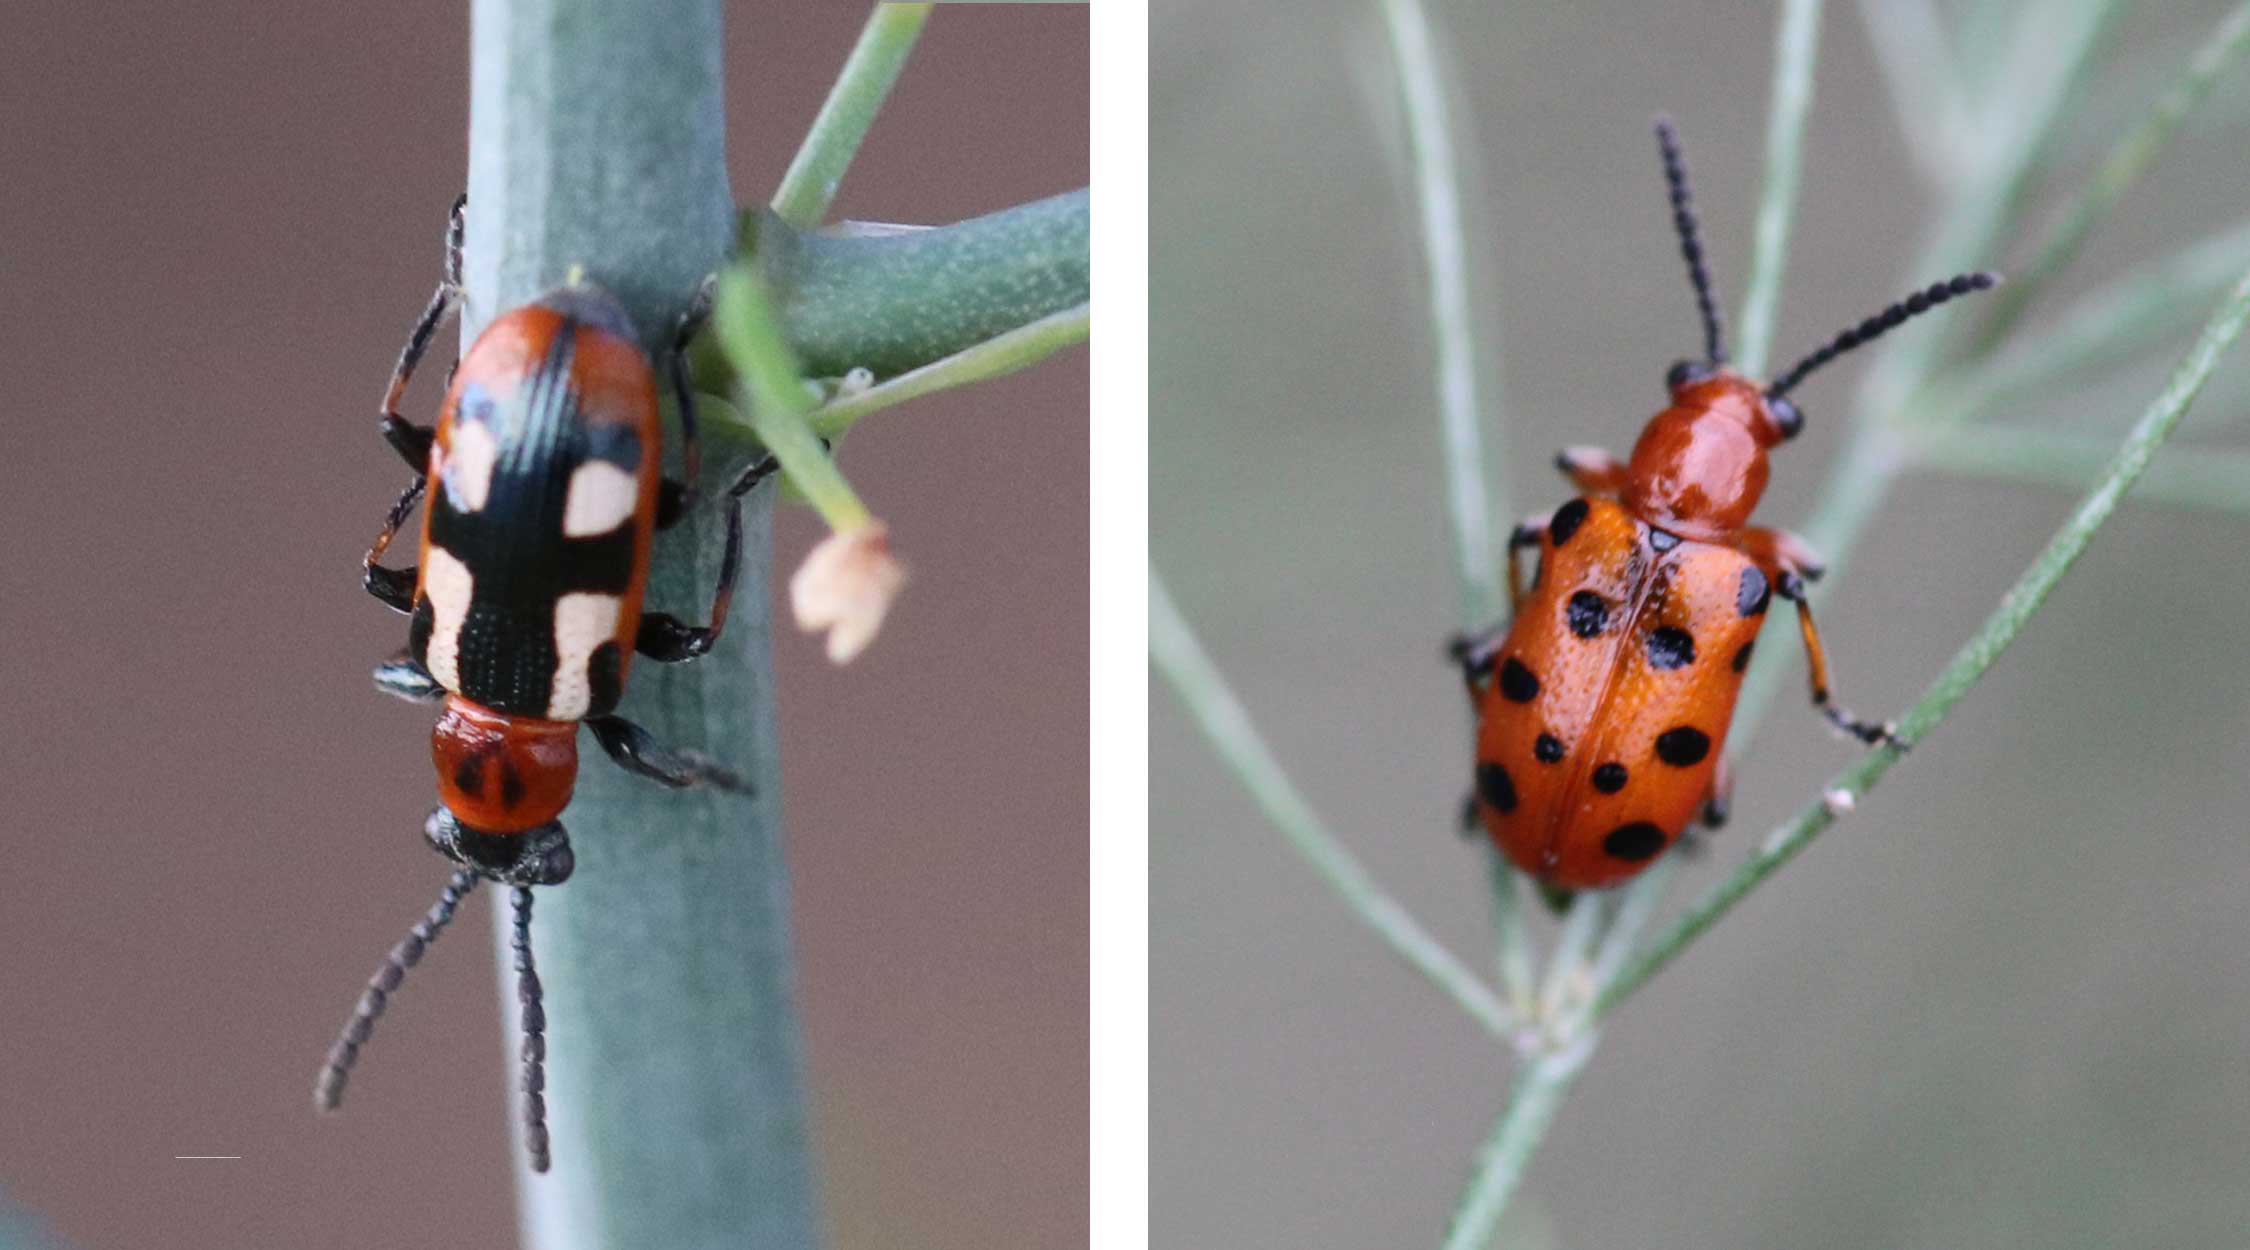 Left: Common asparagus beetle adult. Right: Twelve-spotted asparagus beetle adult.